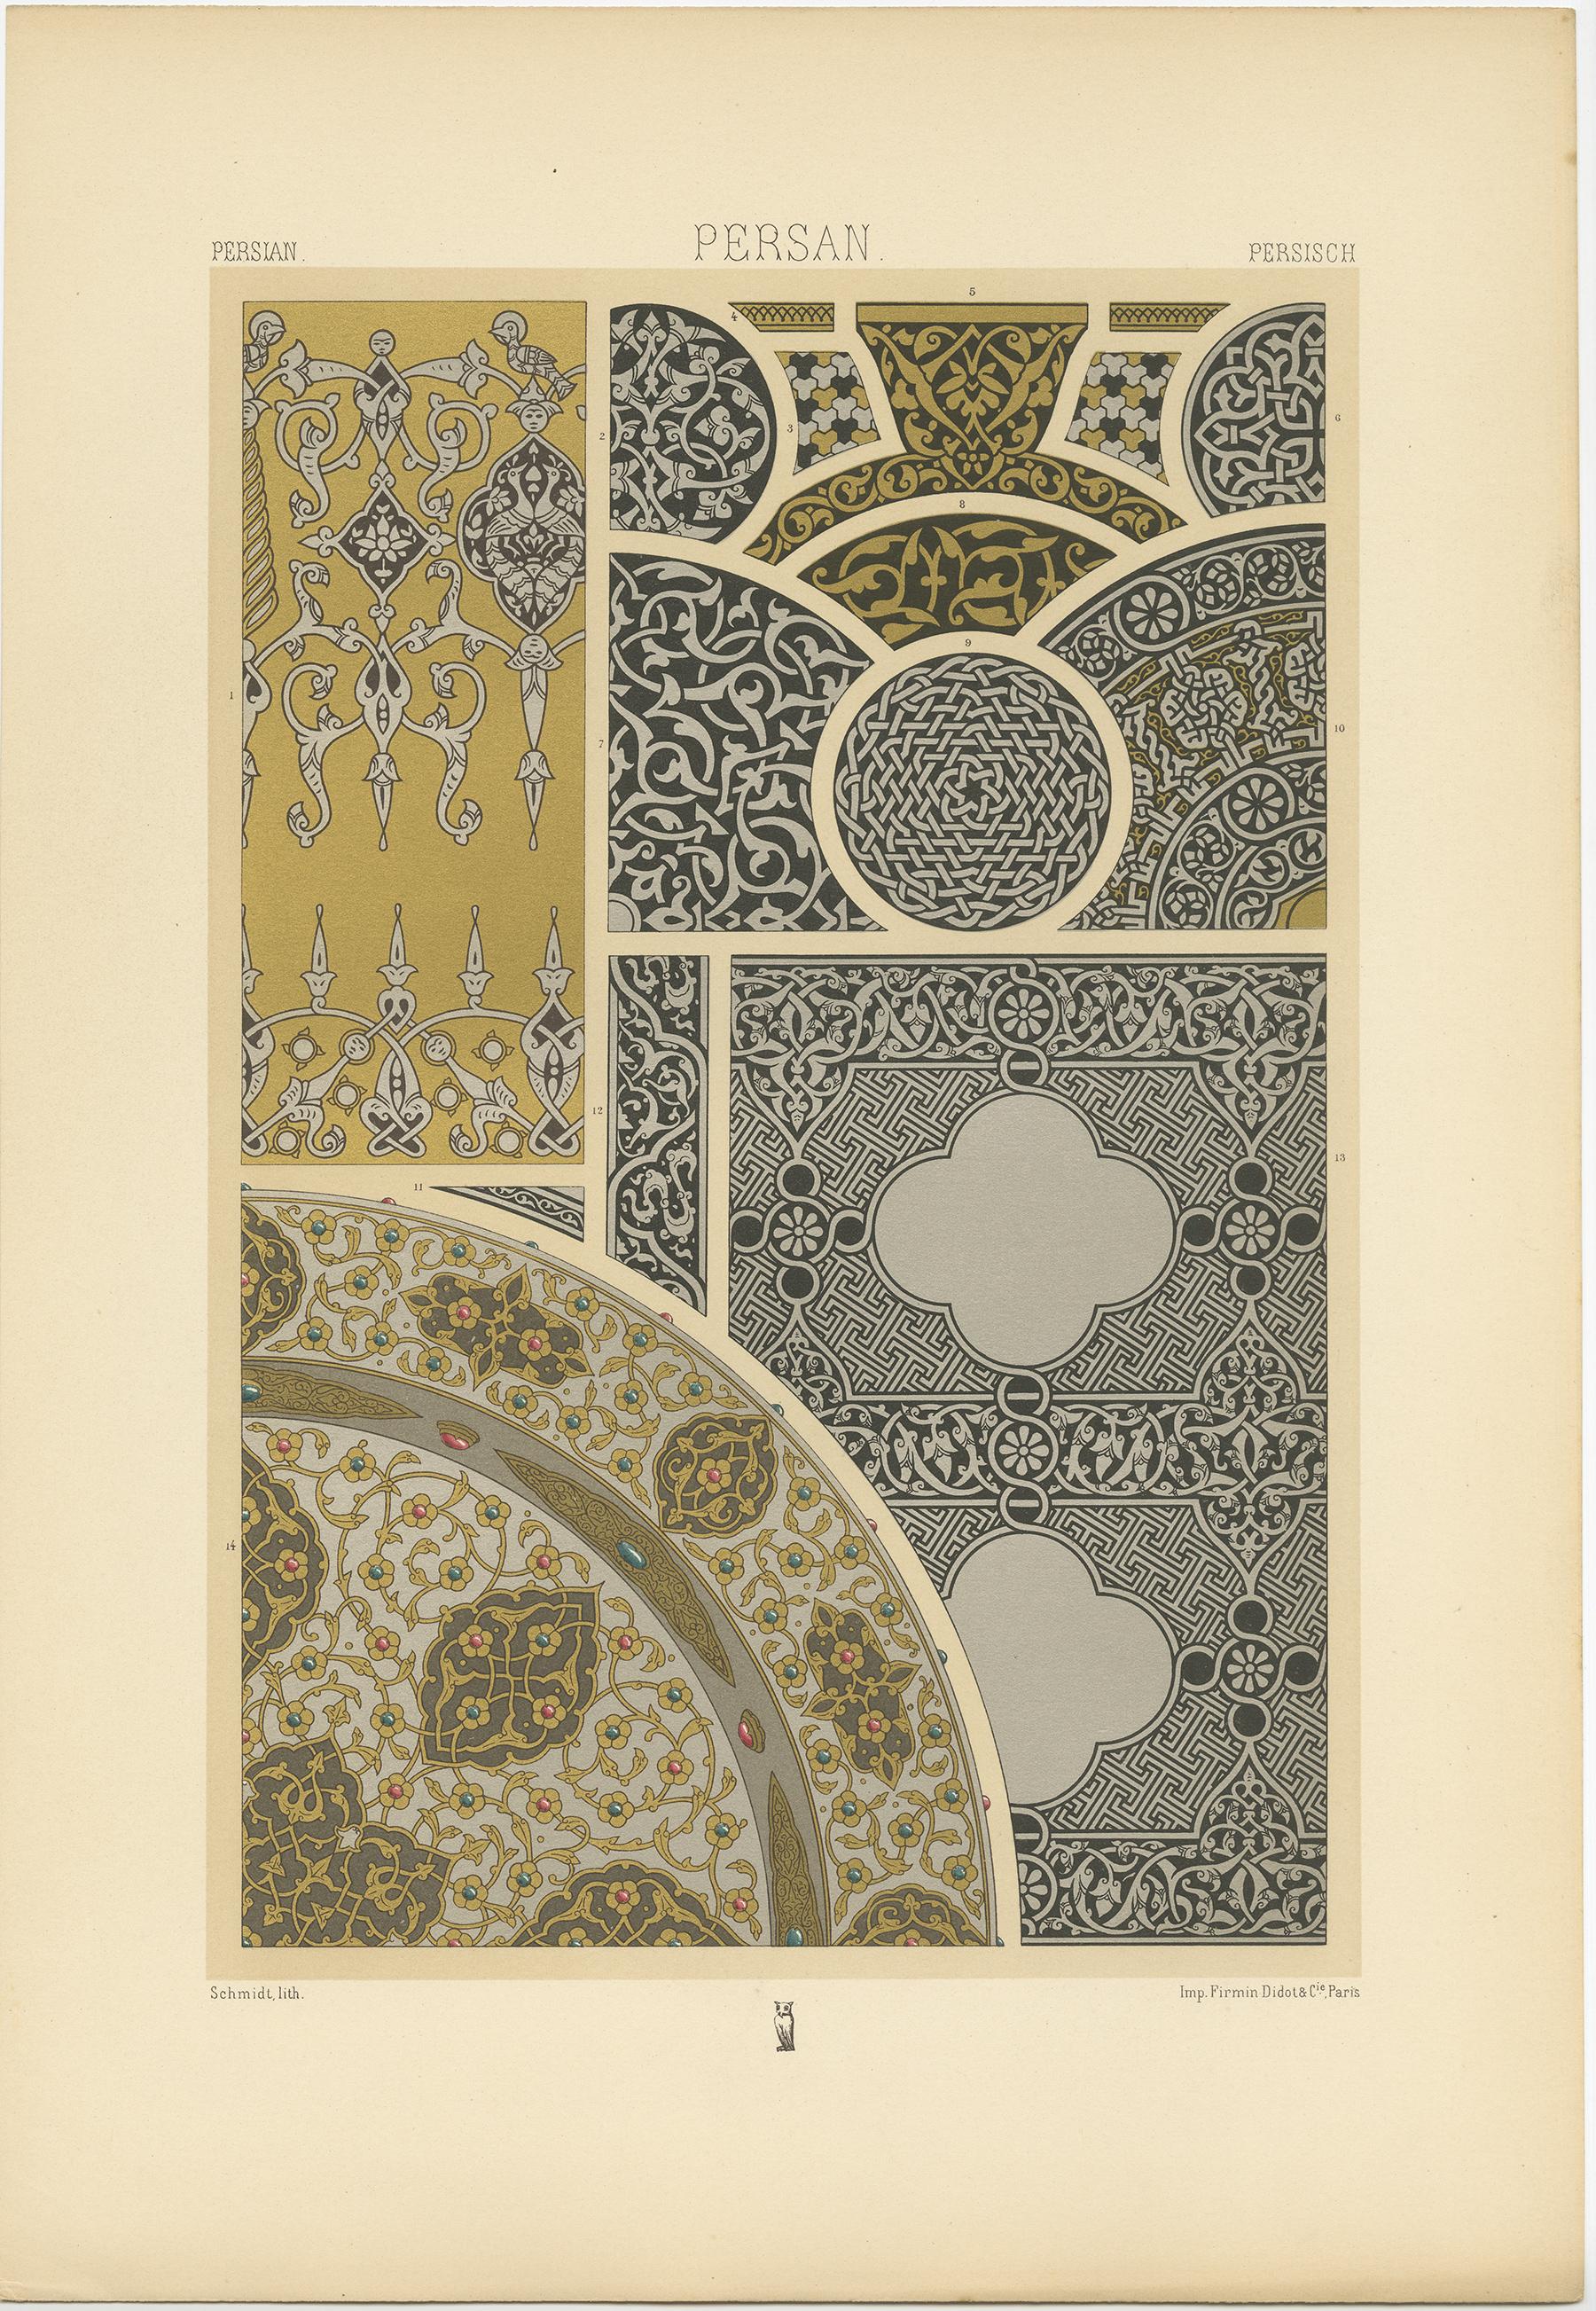 Antique print titled 'Persian -Persan-Persisch'. Chromolithograph of Design from engraved and inlaid metal ornaments. This print originates from 'l'Ornement Polychrome' by Auguste Racinet. Published circa 1890.